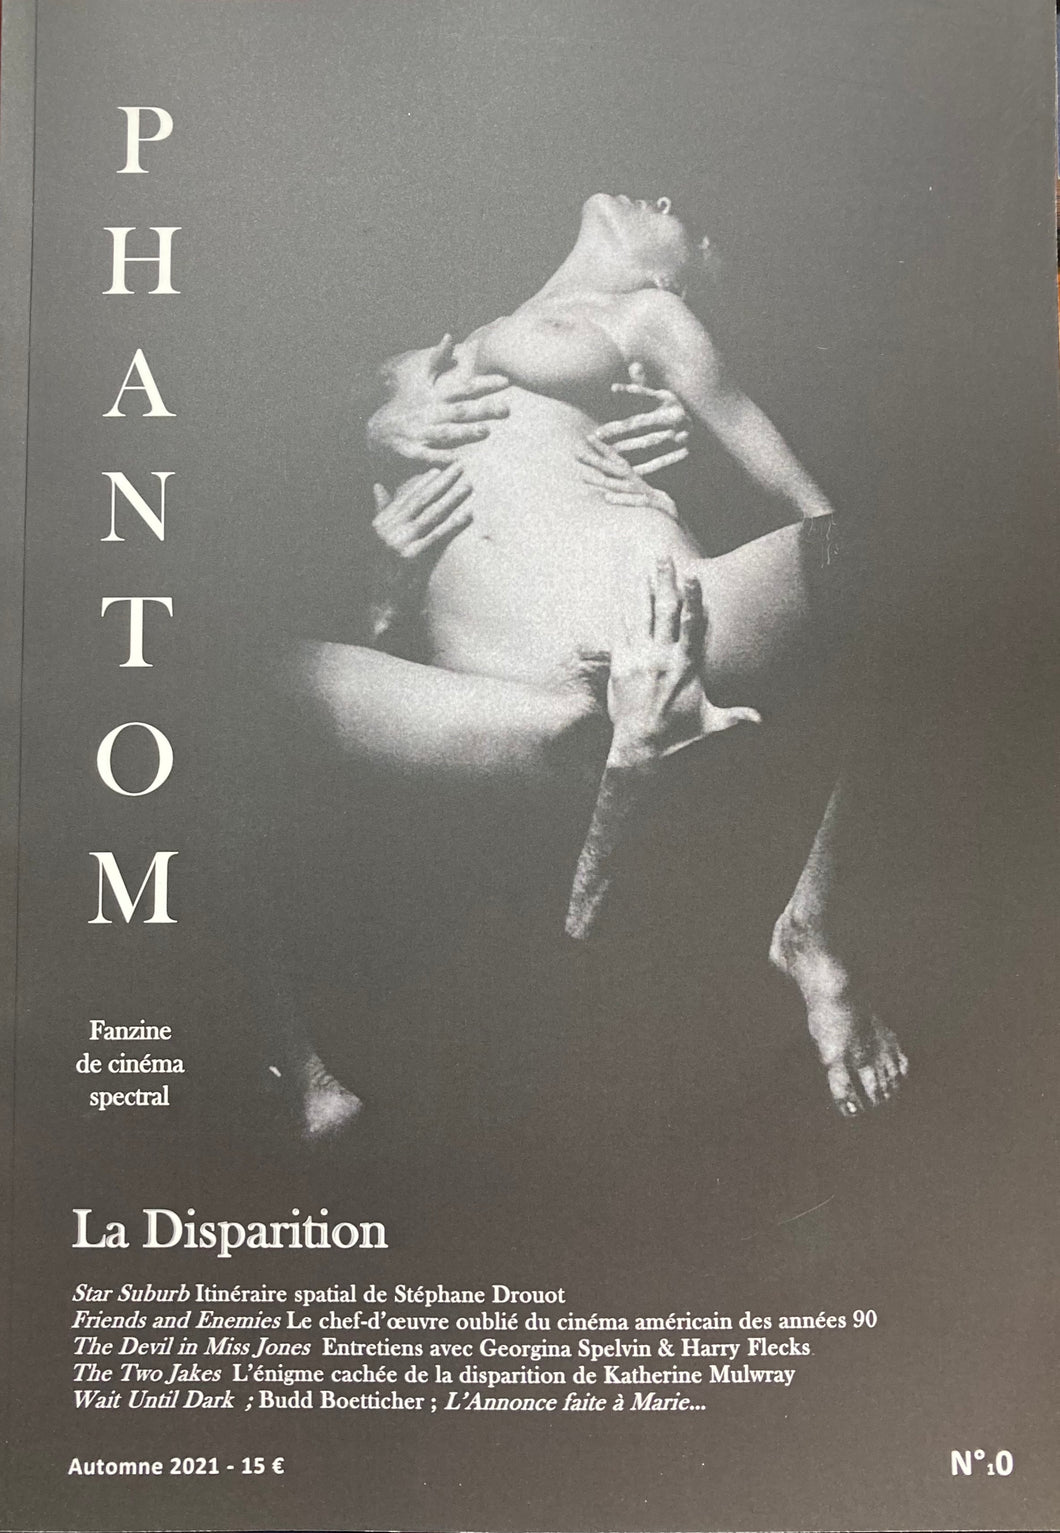 Phantom - Automne 2021 N°0 - front cover